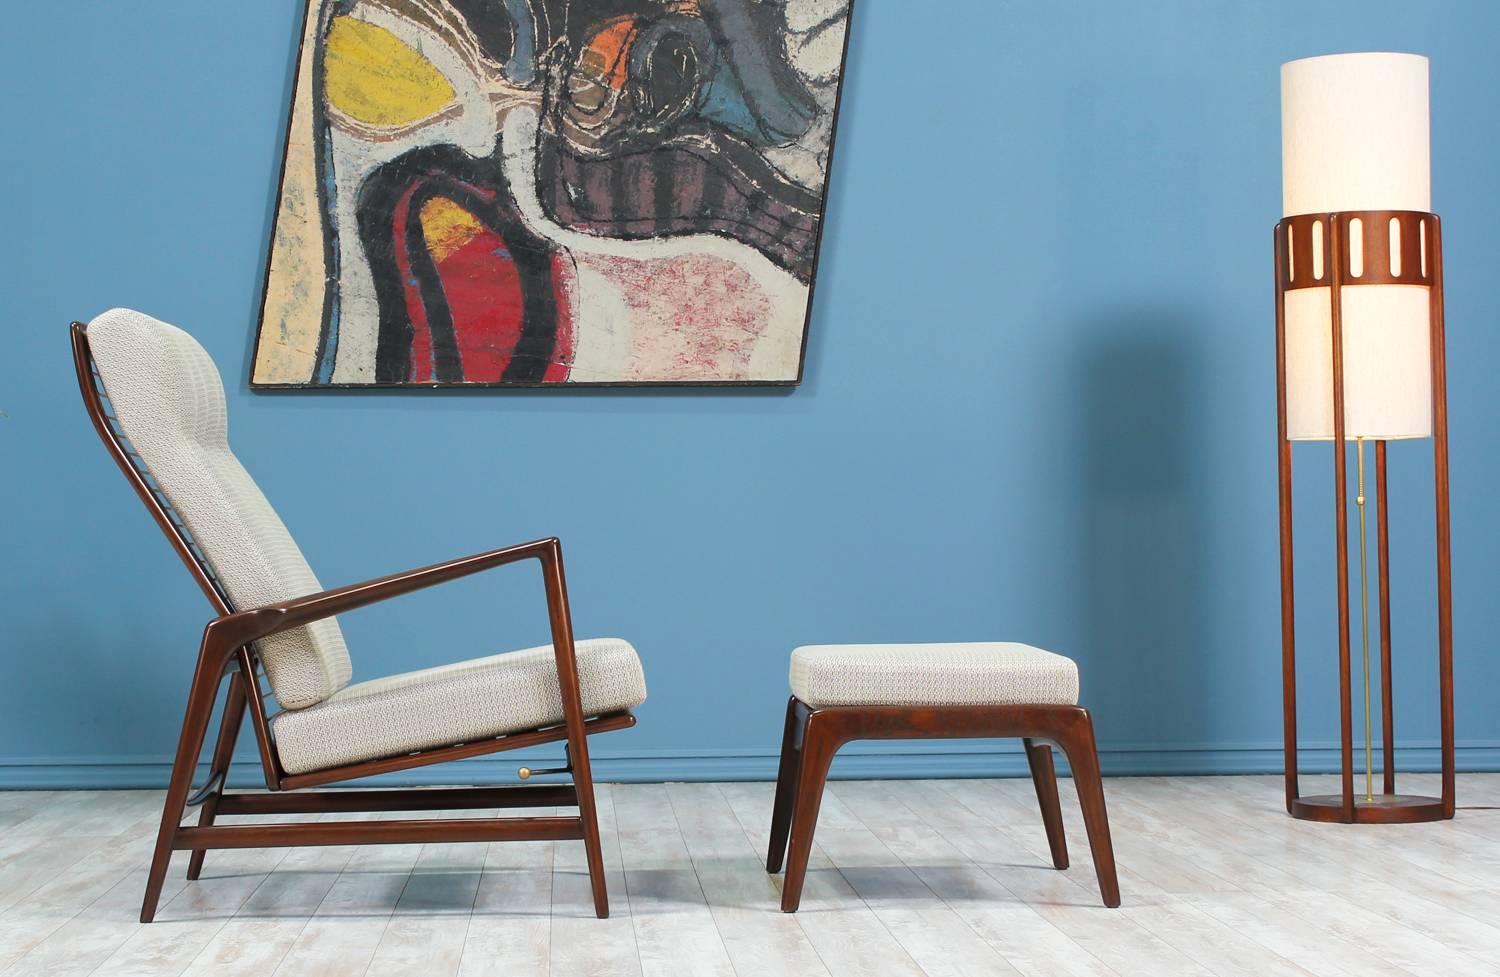 Reclining Lounge Chair with ottoman designed by Ib Kofod-Larsen for Selig in Denmark circa 1960’s. This attractive newly restored Danish Modern design features a walnut-stained beech wood frame with sculpted and angled armrests. With a sculpted